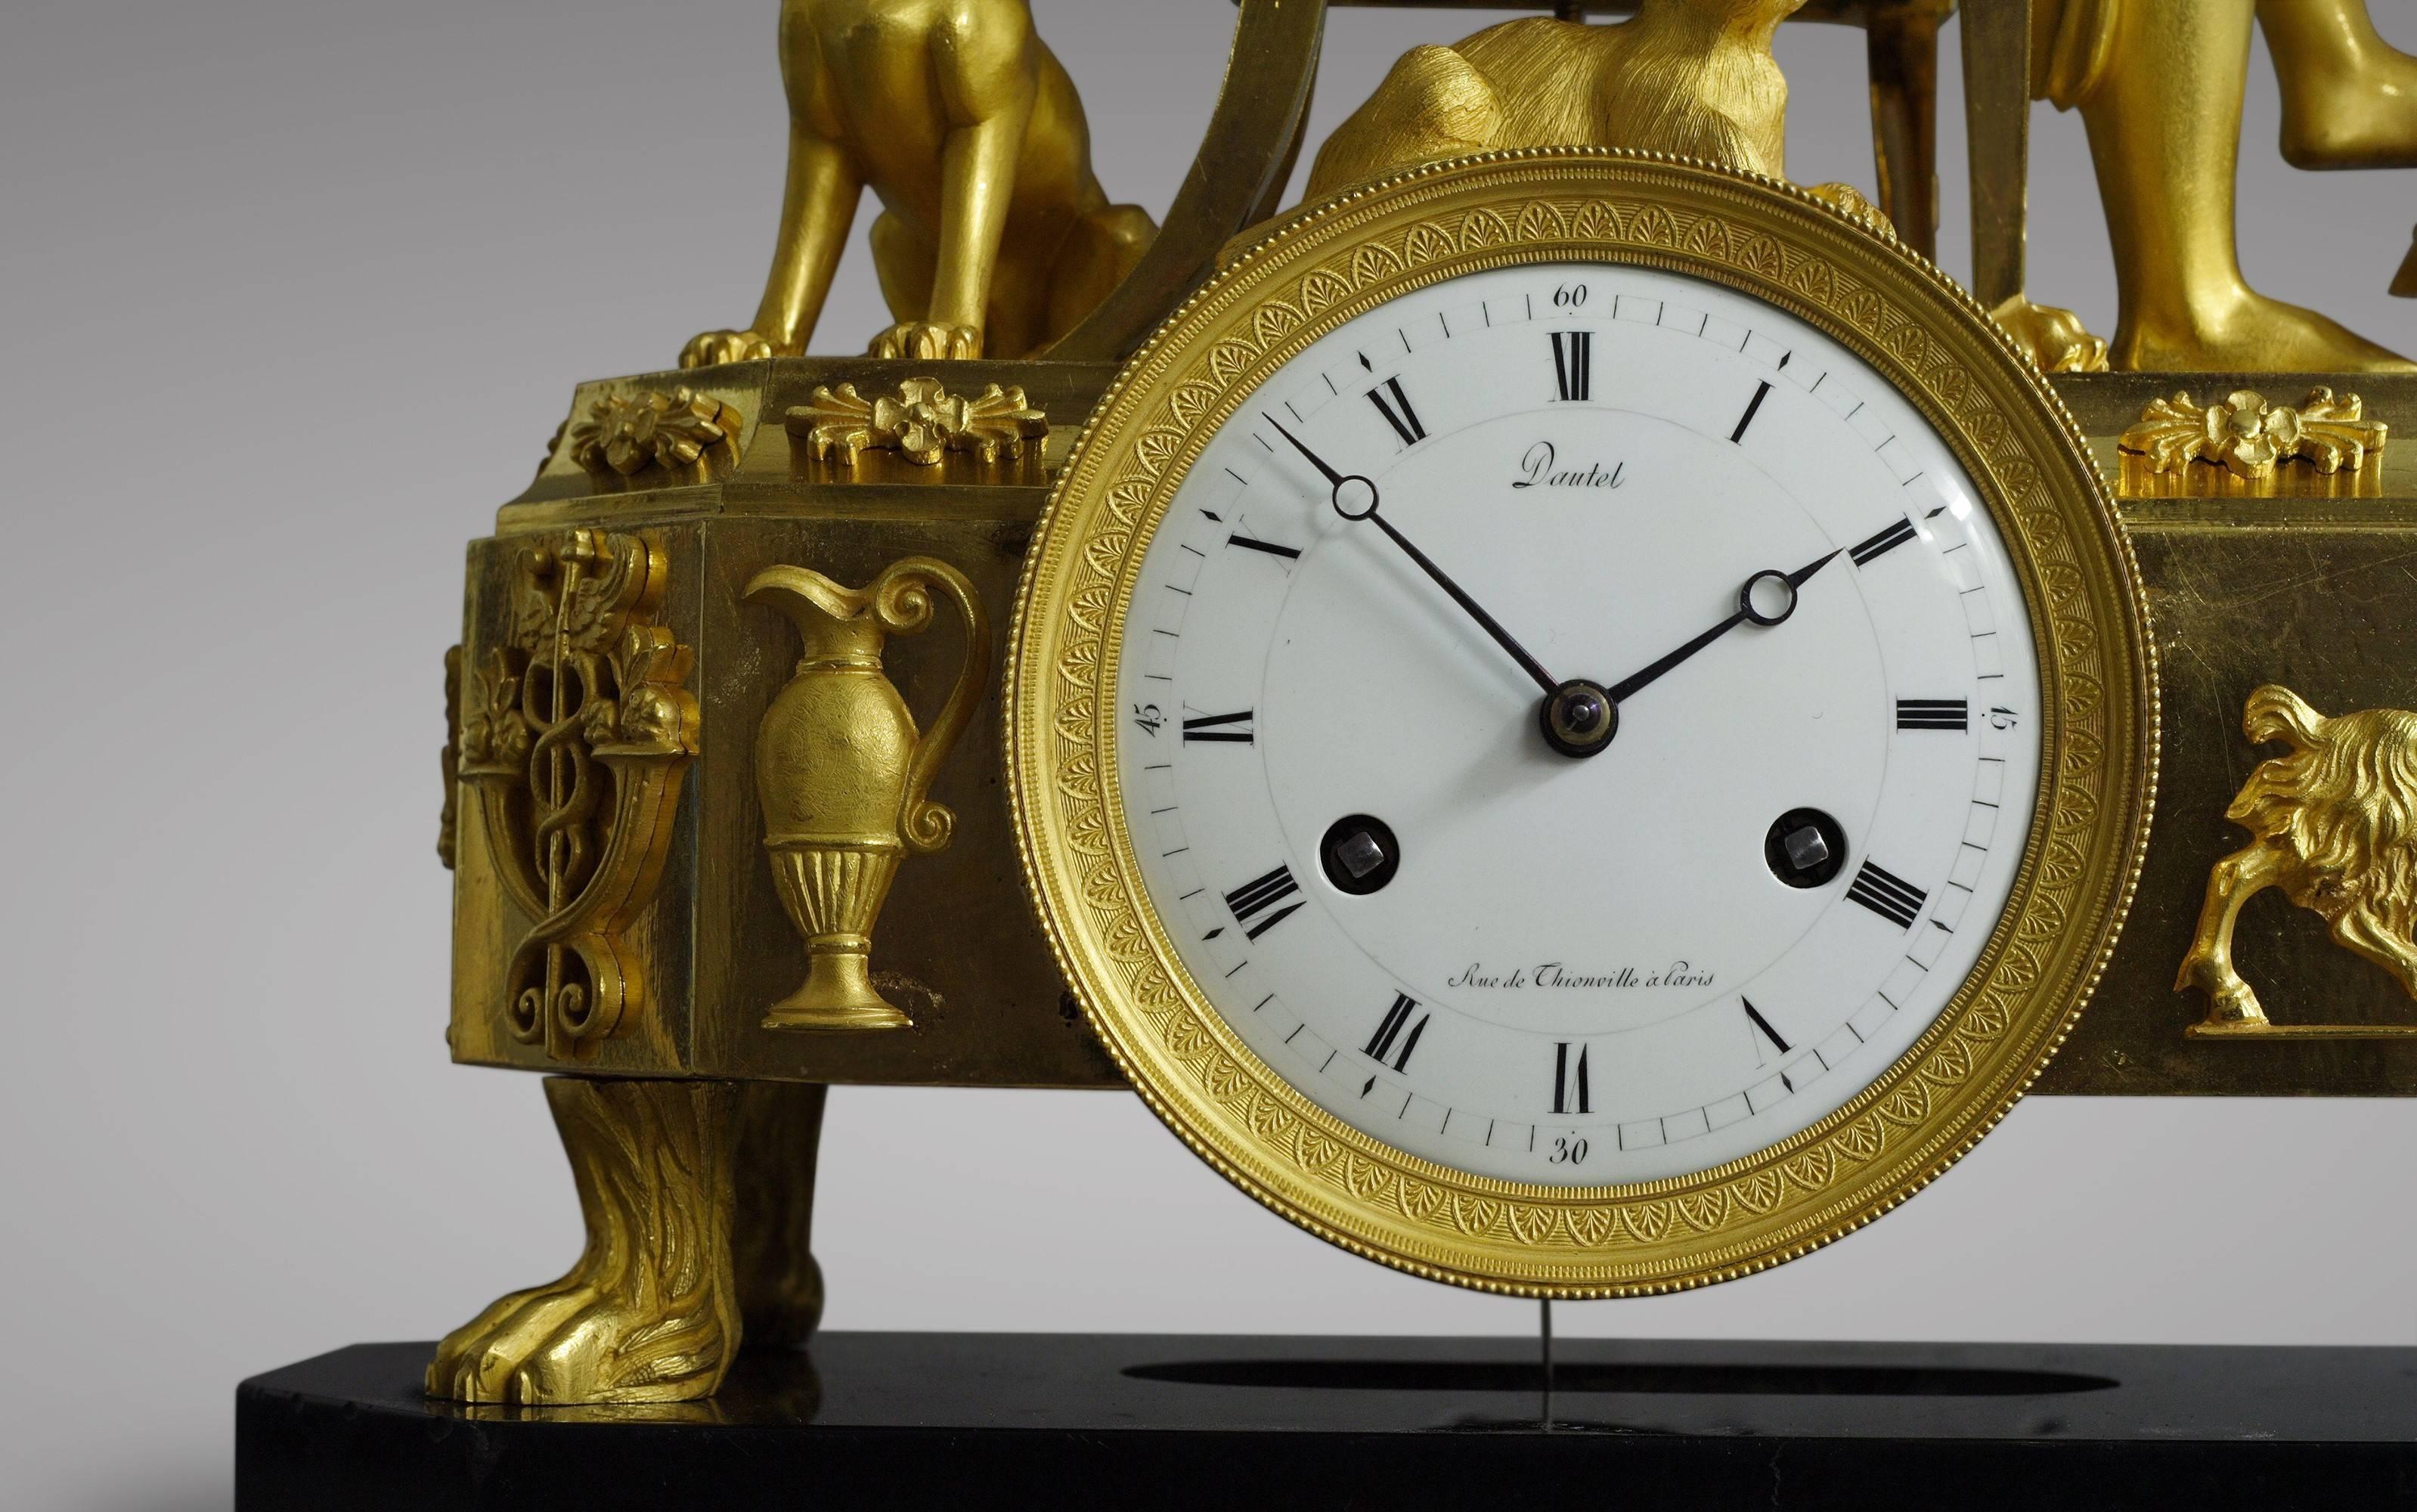 Early 19th Century French Empire Mantel Clock 